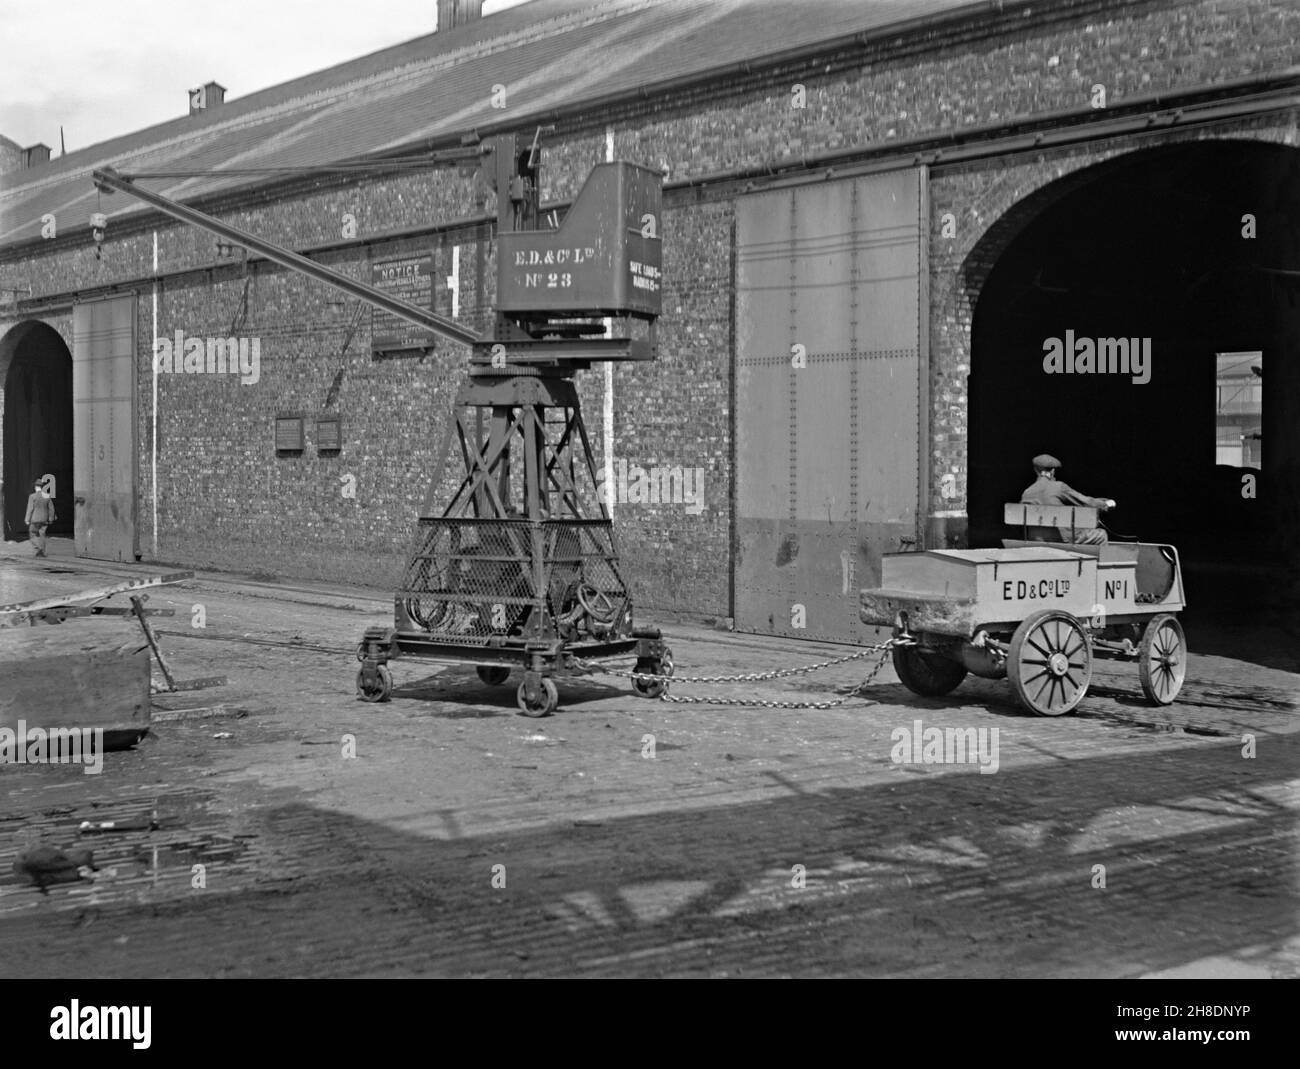 Early battery powered transport – here a Walker truck is towing a small mobile crane at E D and Co Ltd, a shipping and warehousing company at Liverpool Docks, Lancashire, England, UK in the early years of the twentieth century. Walker Electric Trucks were battery-powered vehicles built from 1907 to 1942 in the USA. In the early years of motor transport electrical power was a good option compared with petrol for short-distance commercial transport, such as moving goods around factories or local deliveries – a vintage 20th century photograph. Stock Photo